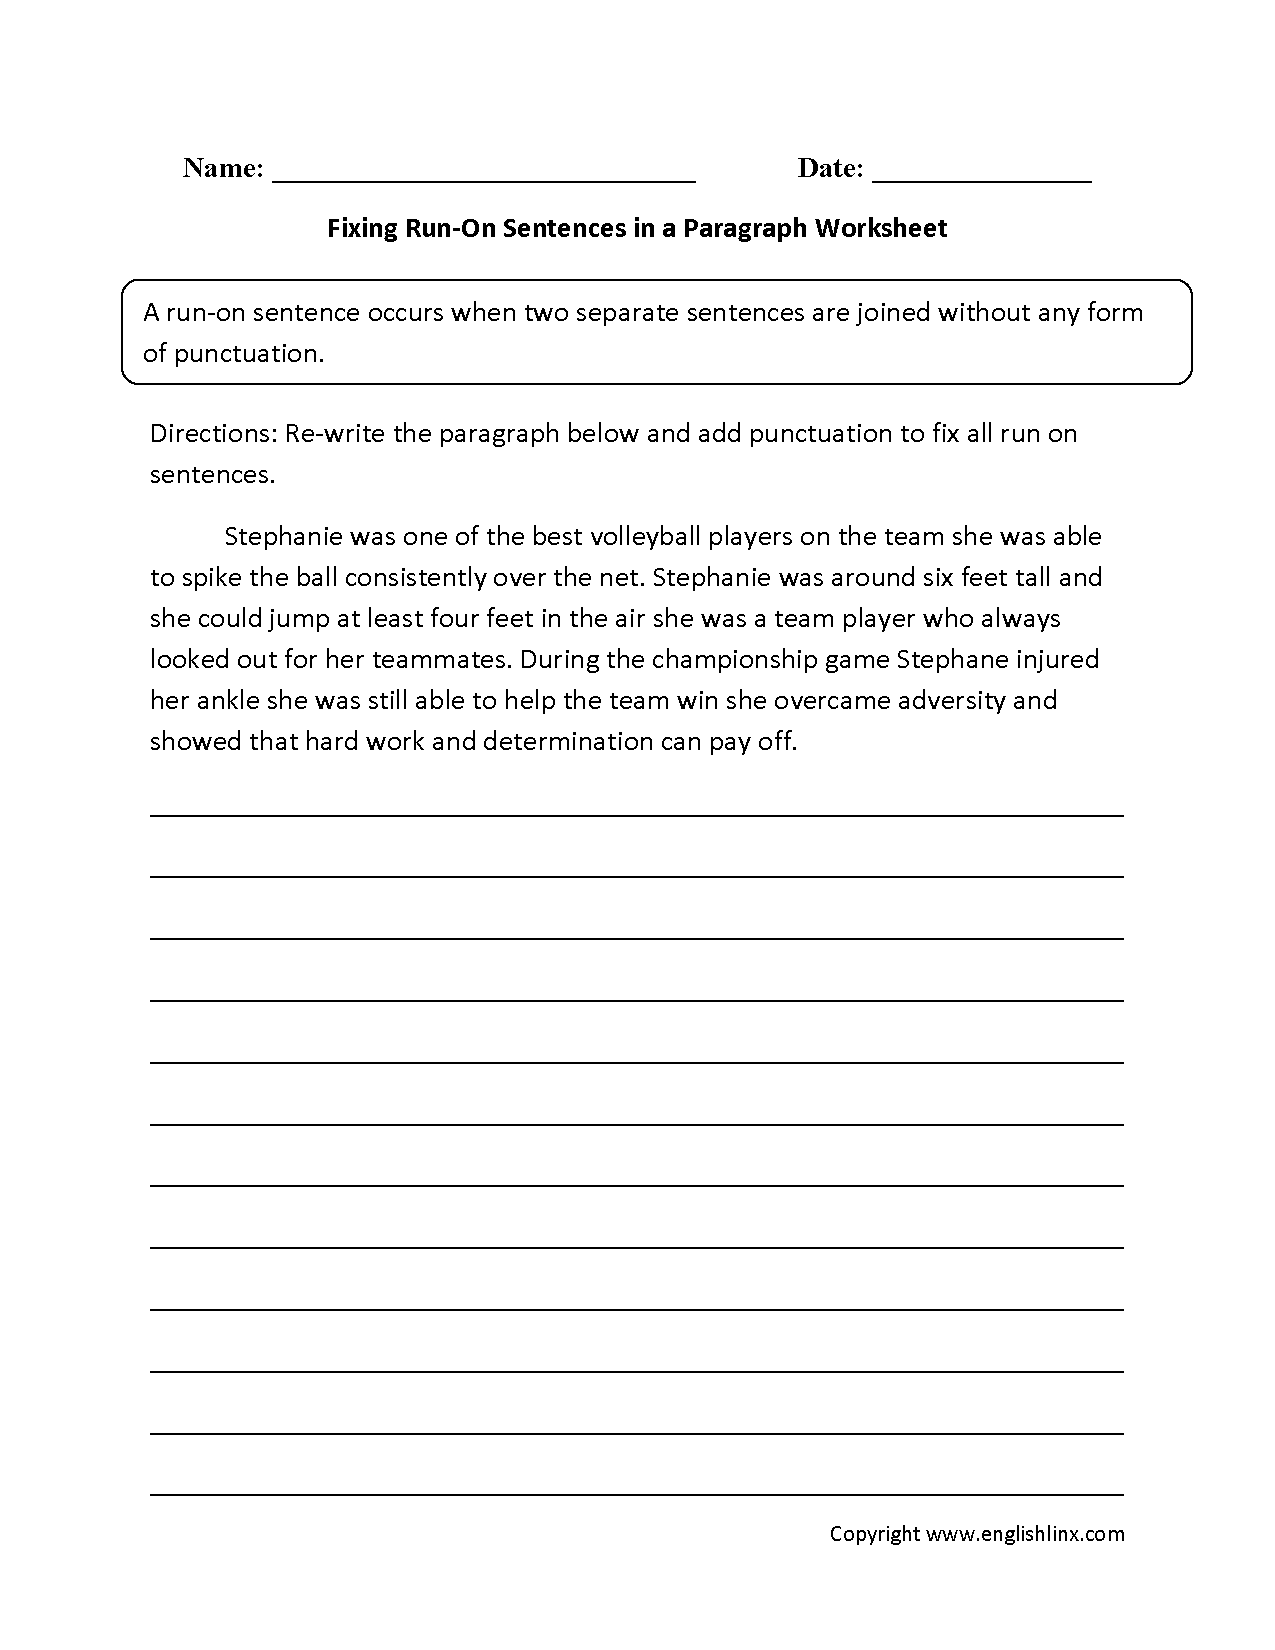 Proofreading Paragraphs Worksheets 4th Grade - grade 4 punctuation